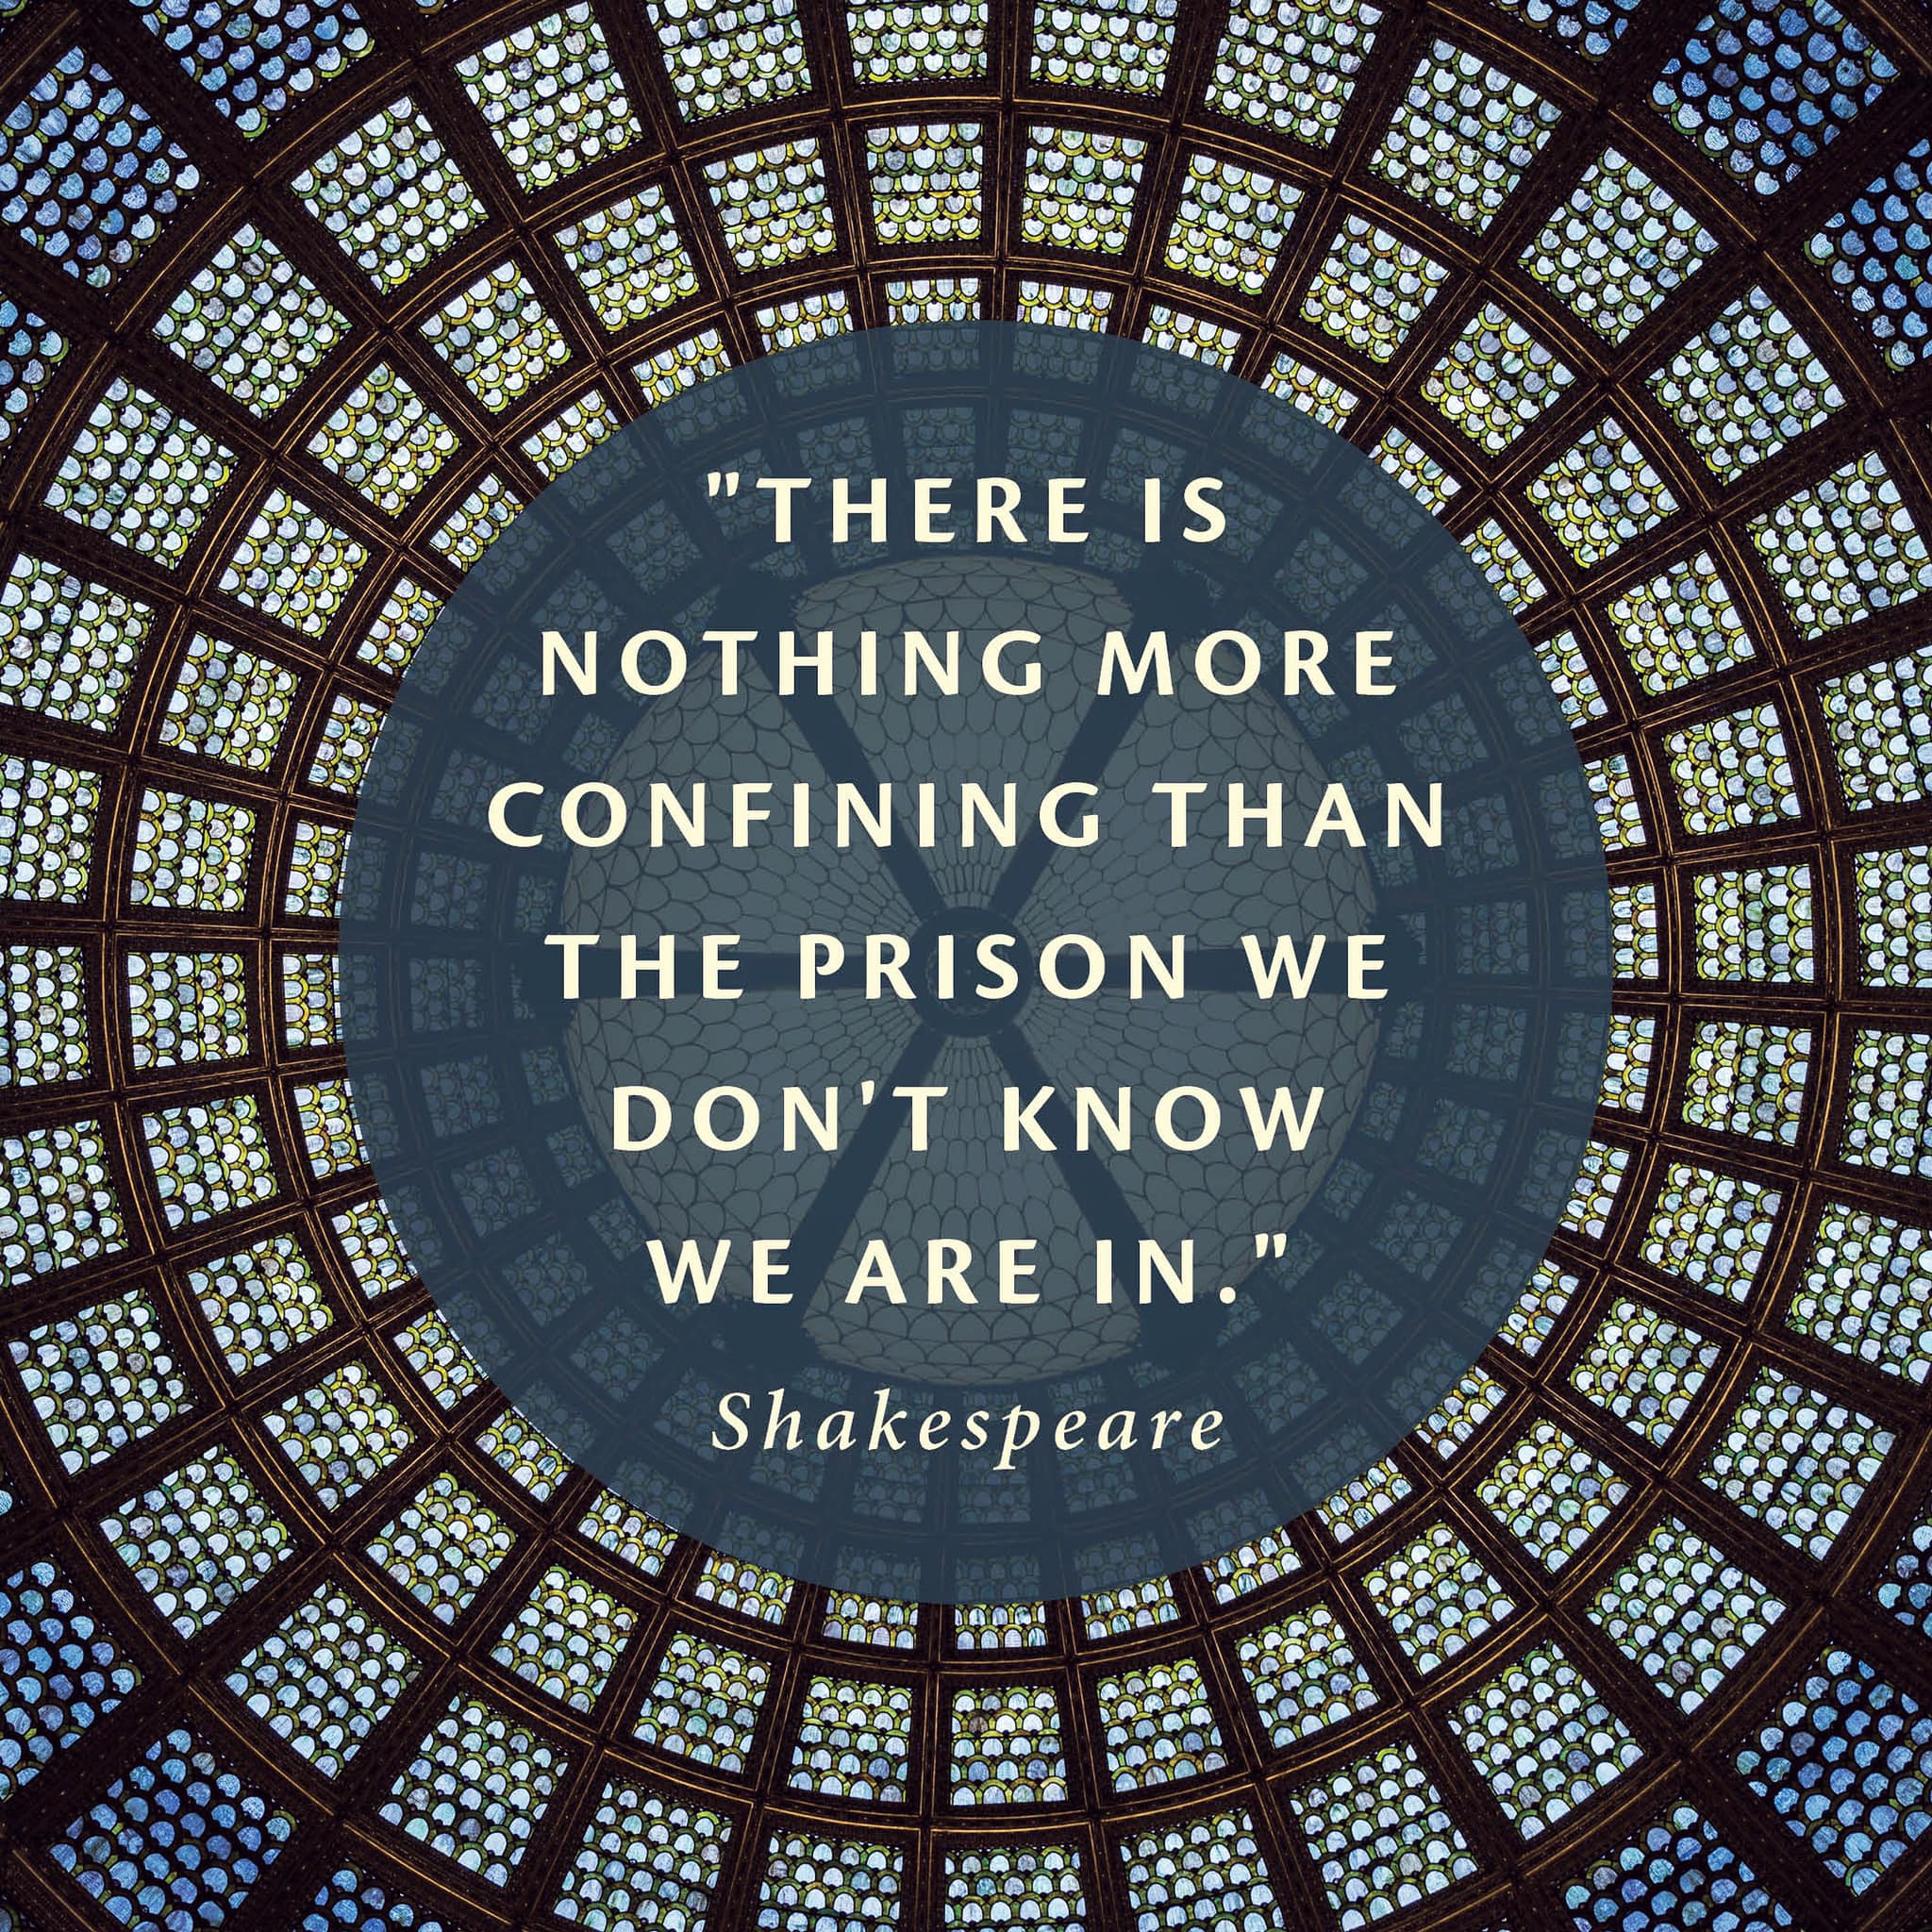 There is nothing more confining than the prison we don’t know we are in.